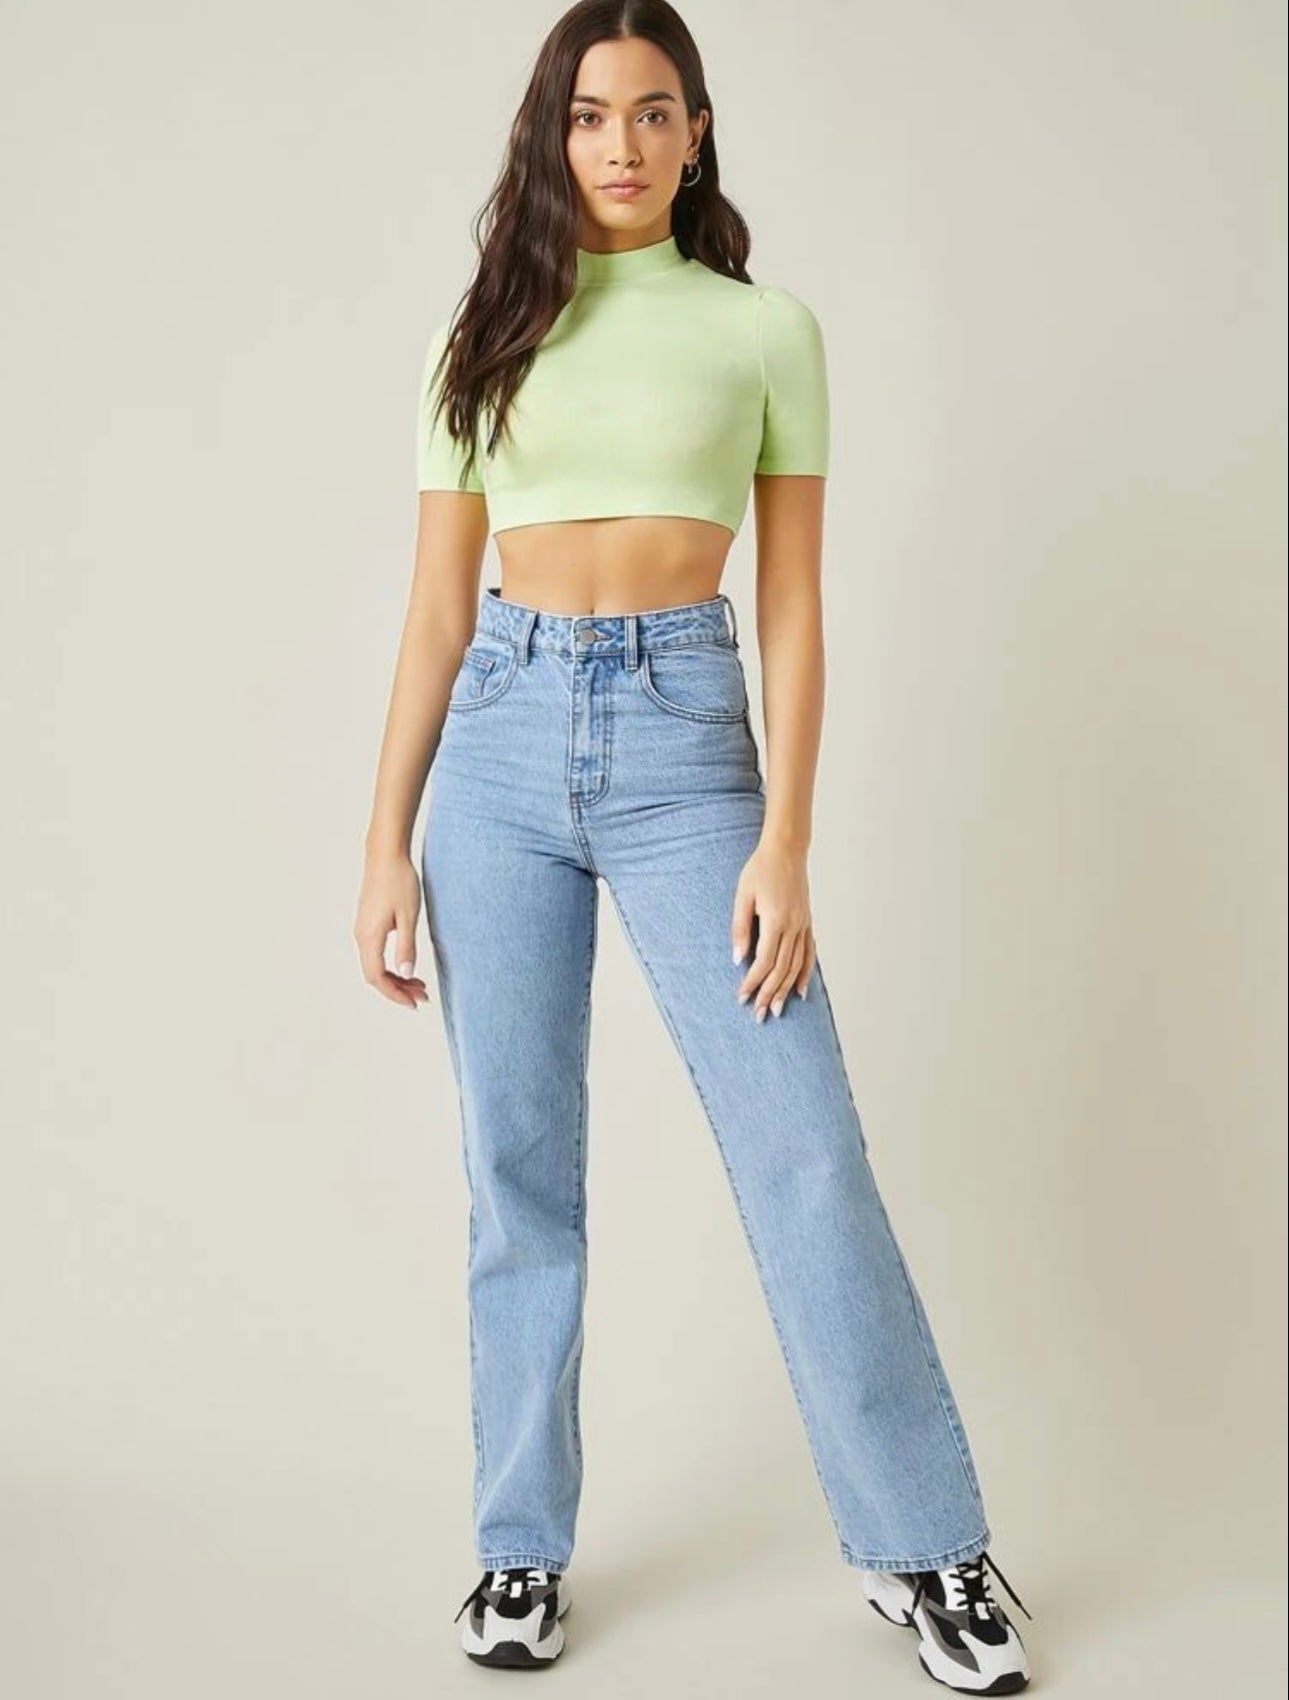 Teen Solid Pastel Green Rib Fitted Crop Top